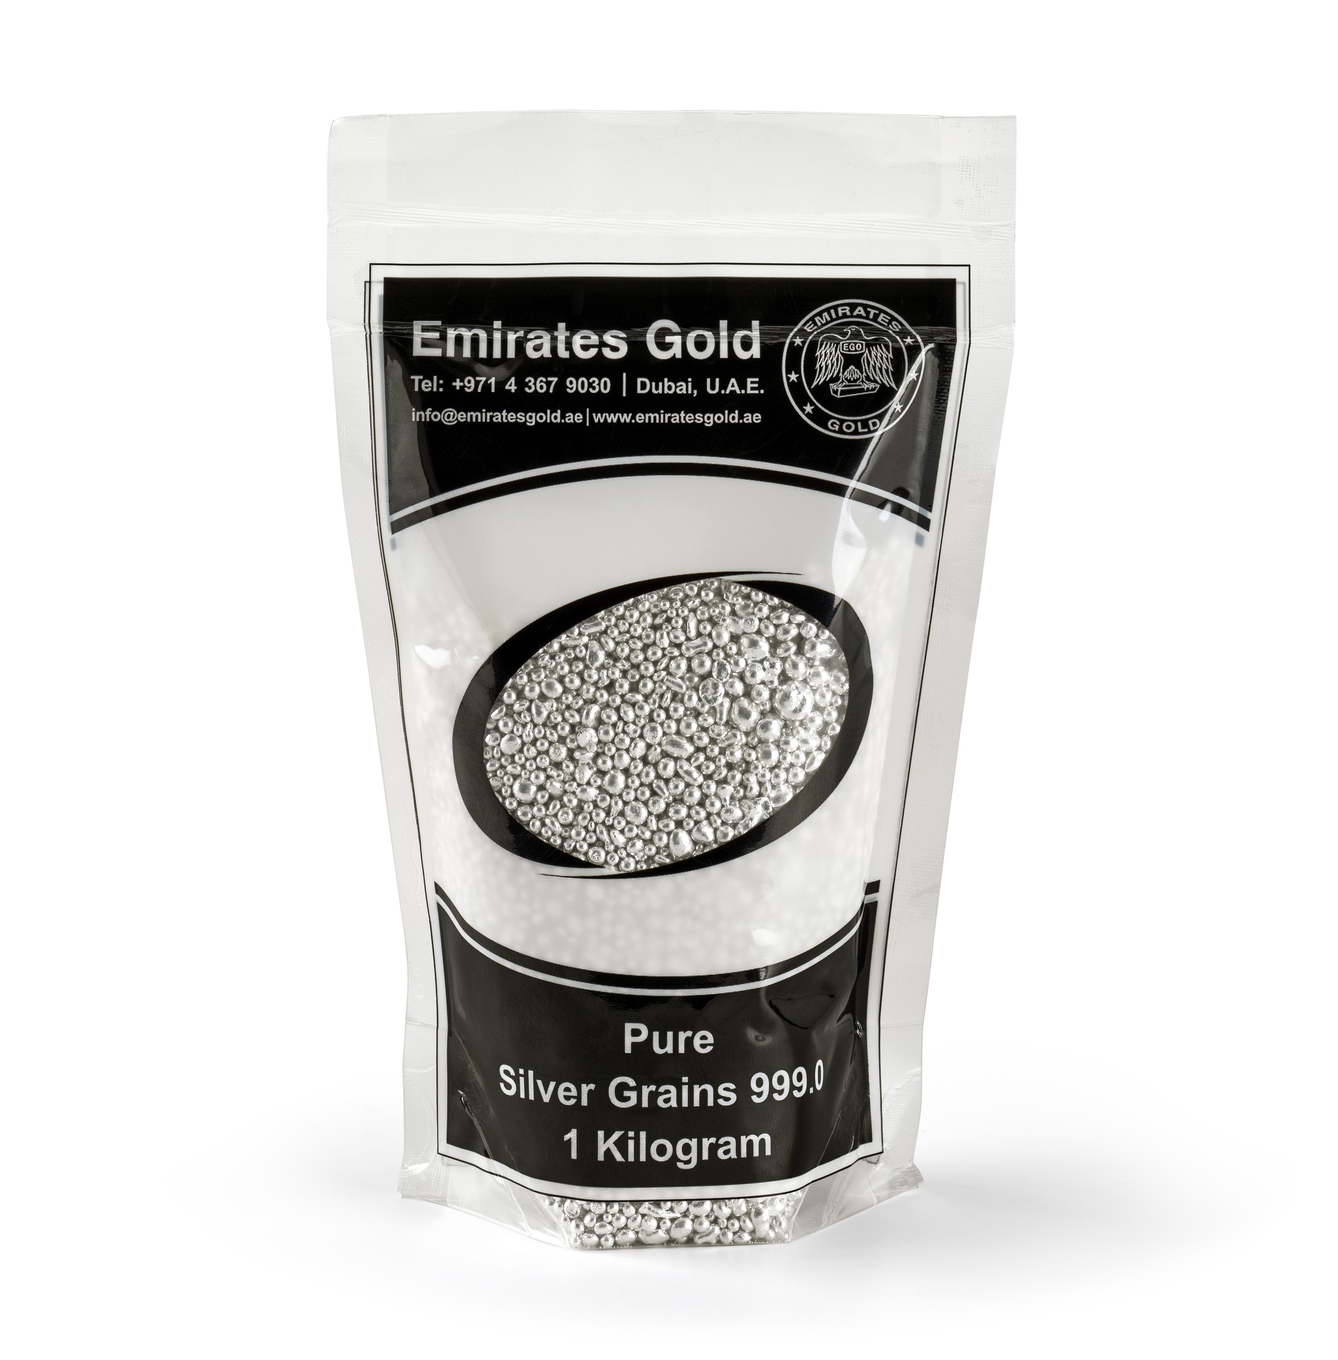 Fine Silver Grains – 1 KG – 999.0 Purity – Emirates Gold